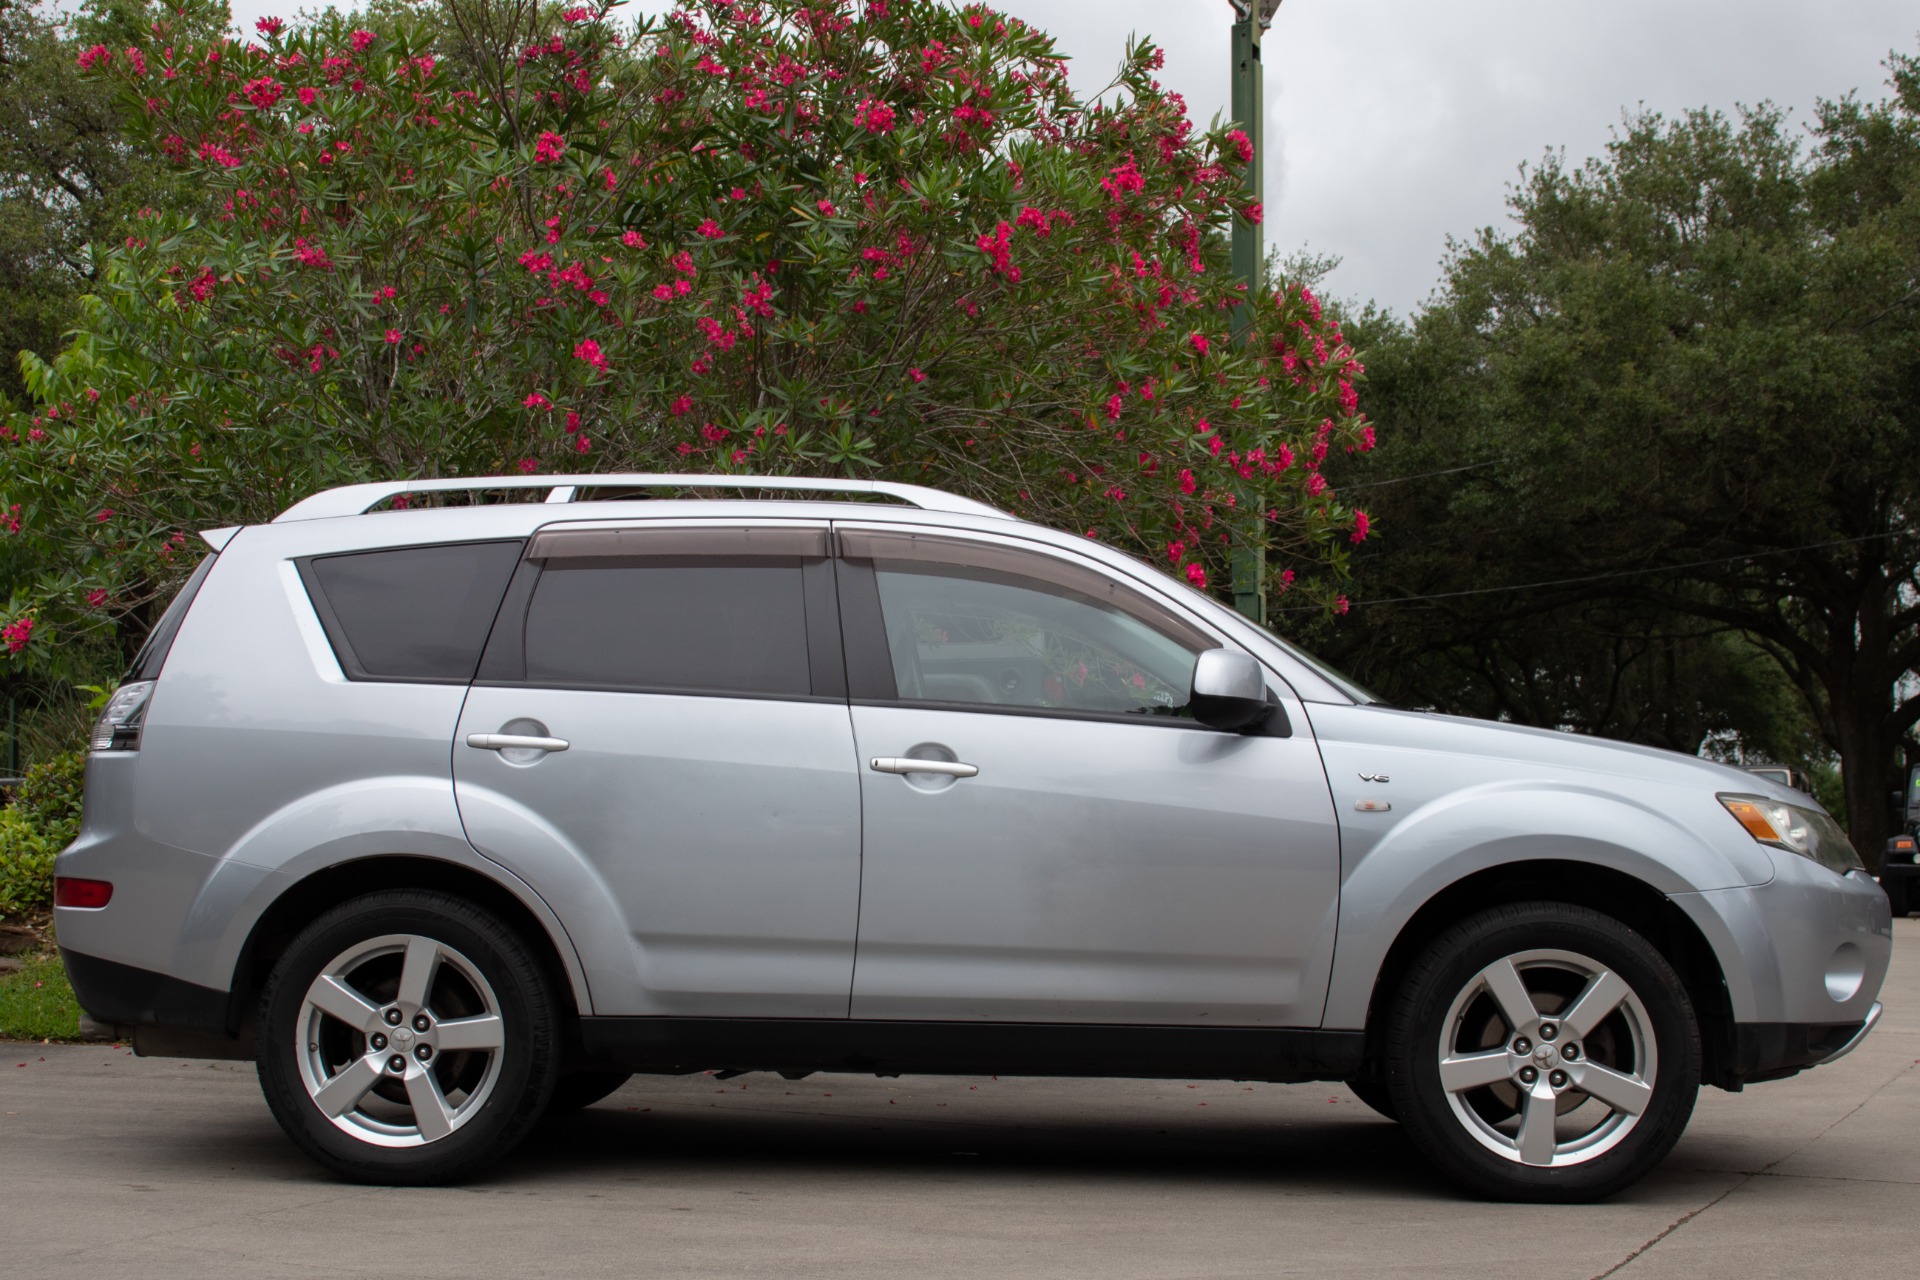 Used 2008 Mitsubishi Outlander XLS For Sale ($6,995) | Select Jeeps Inc ...